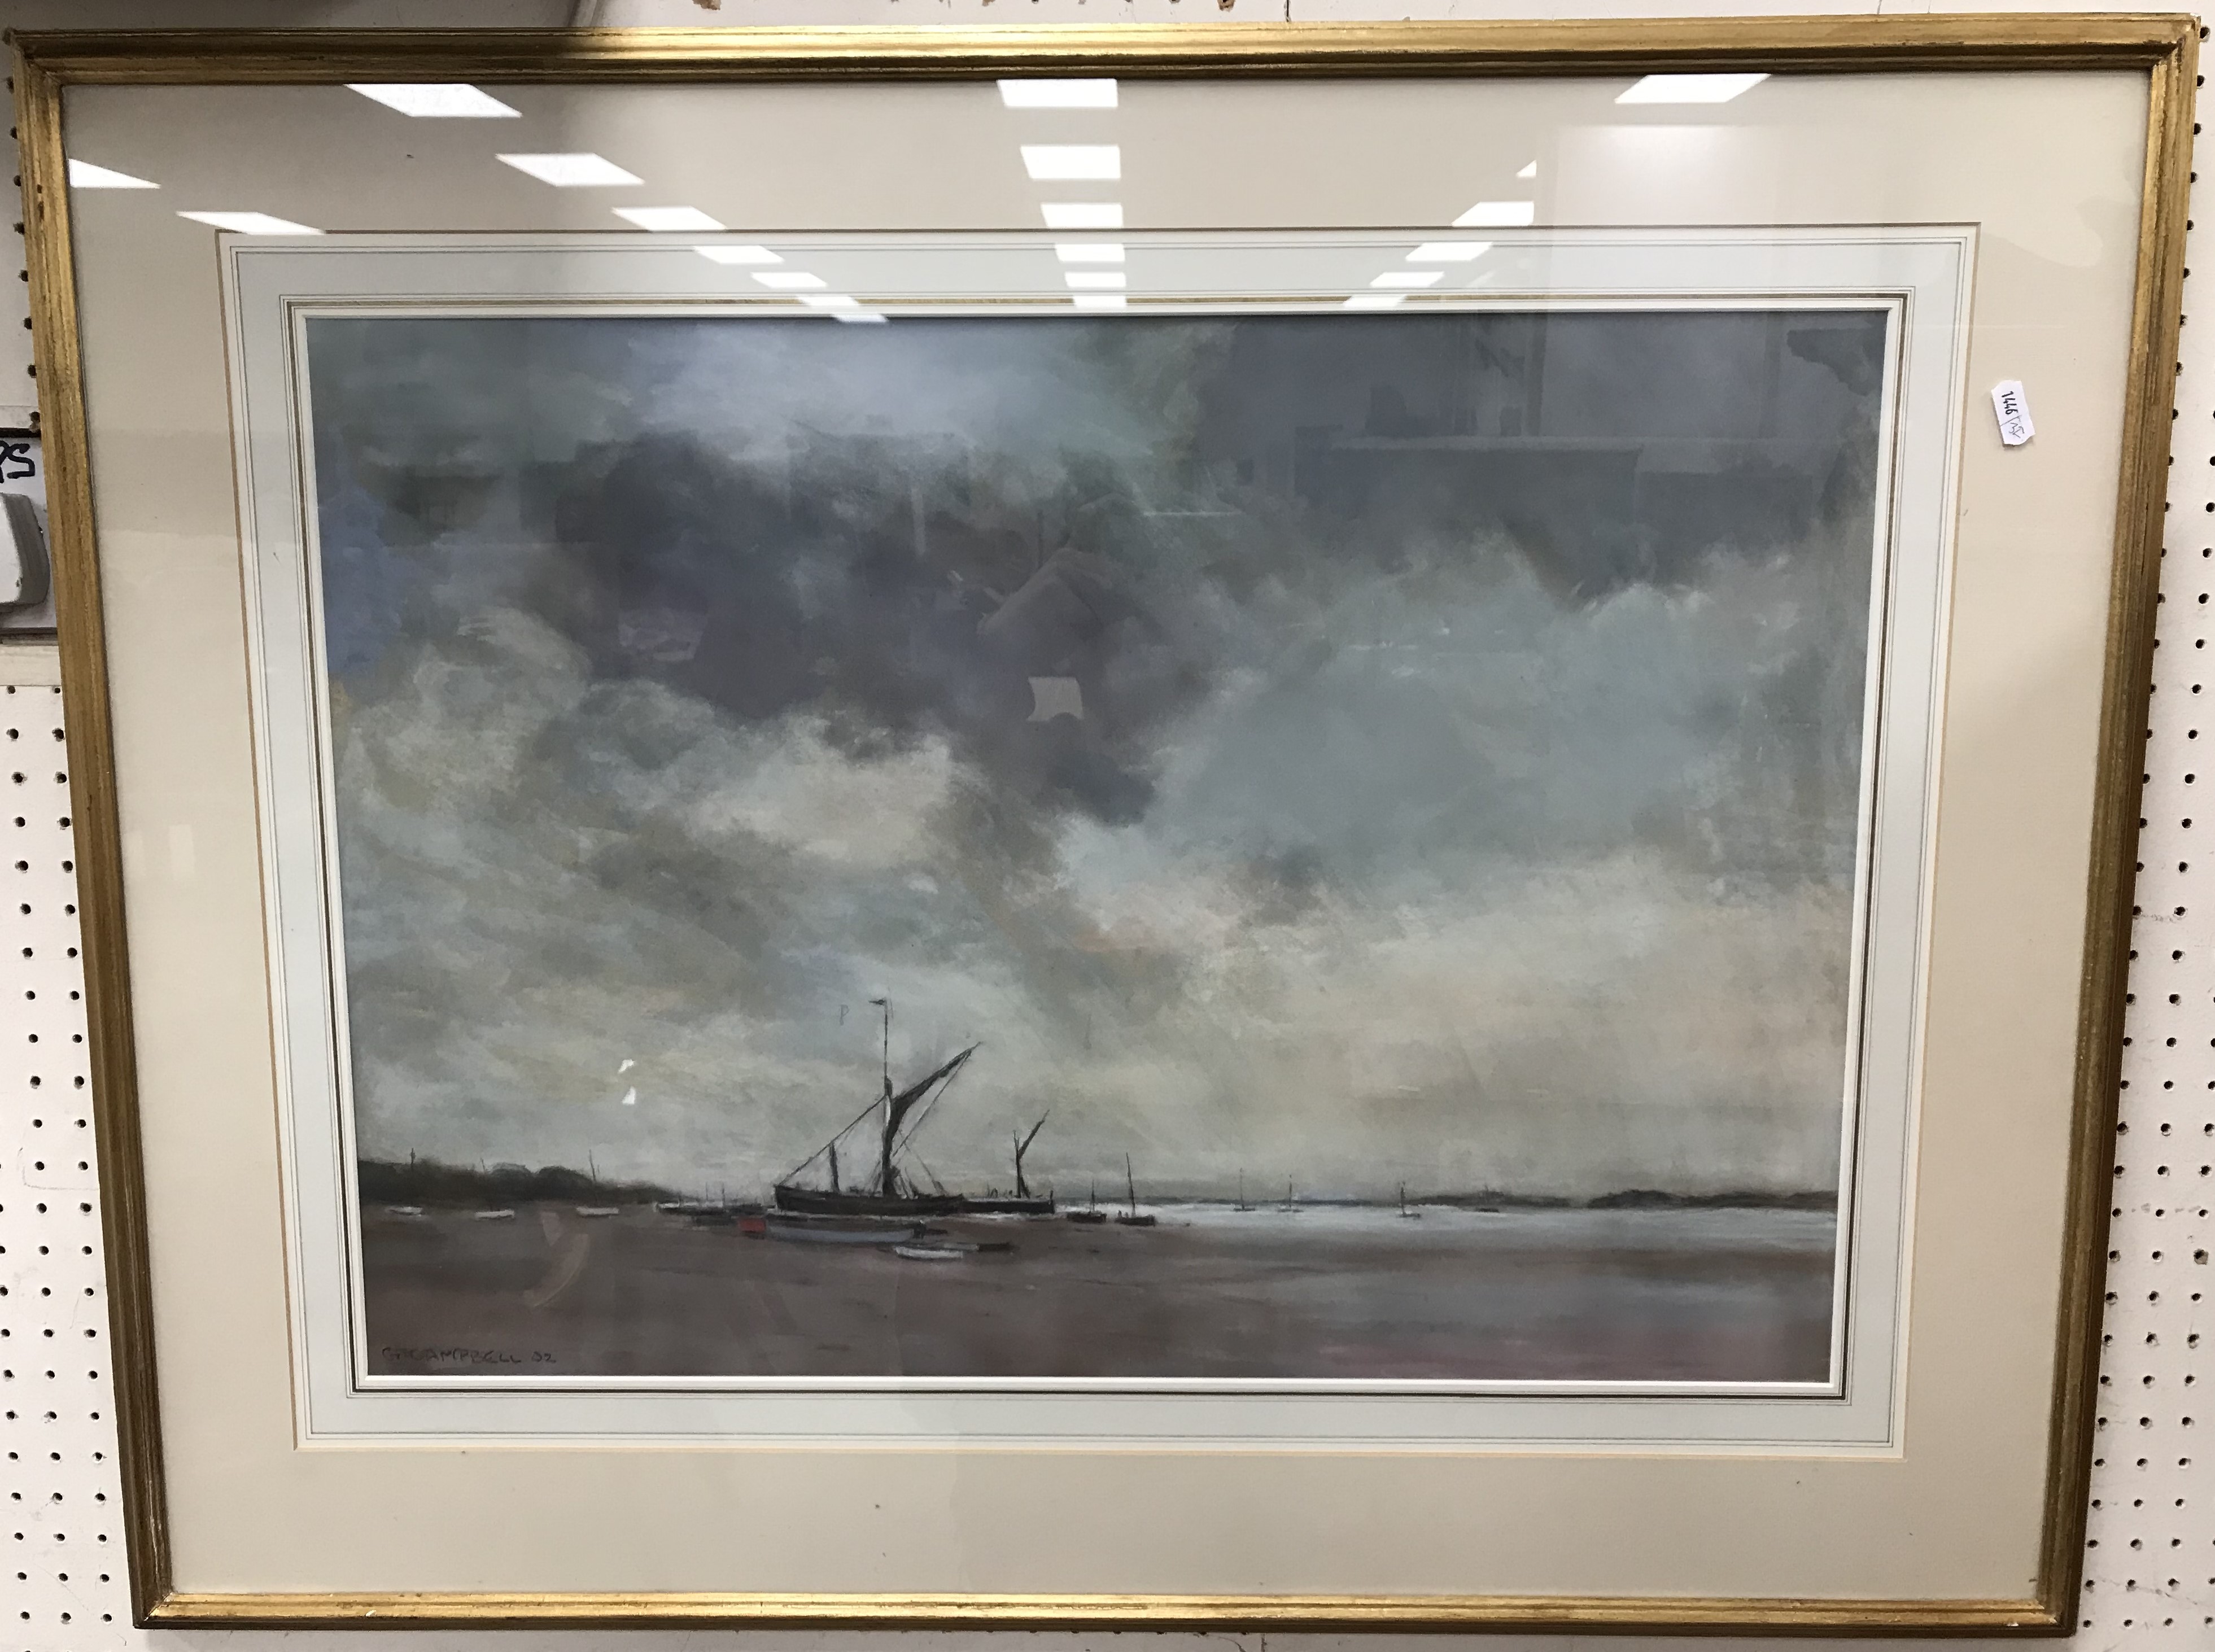 G CAMPBELL "Coastal scene with beached vessels in foreground, grey clouds above" pastel, - Image 2 of 3